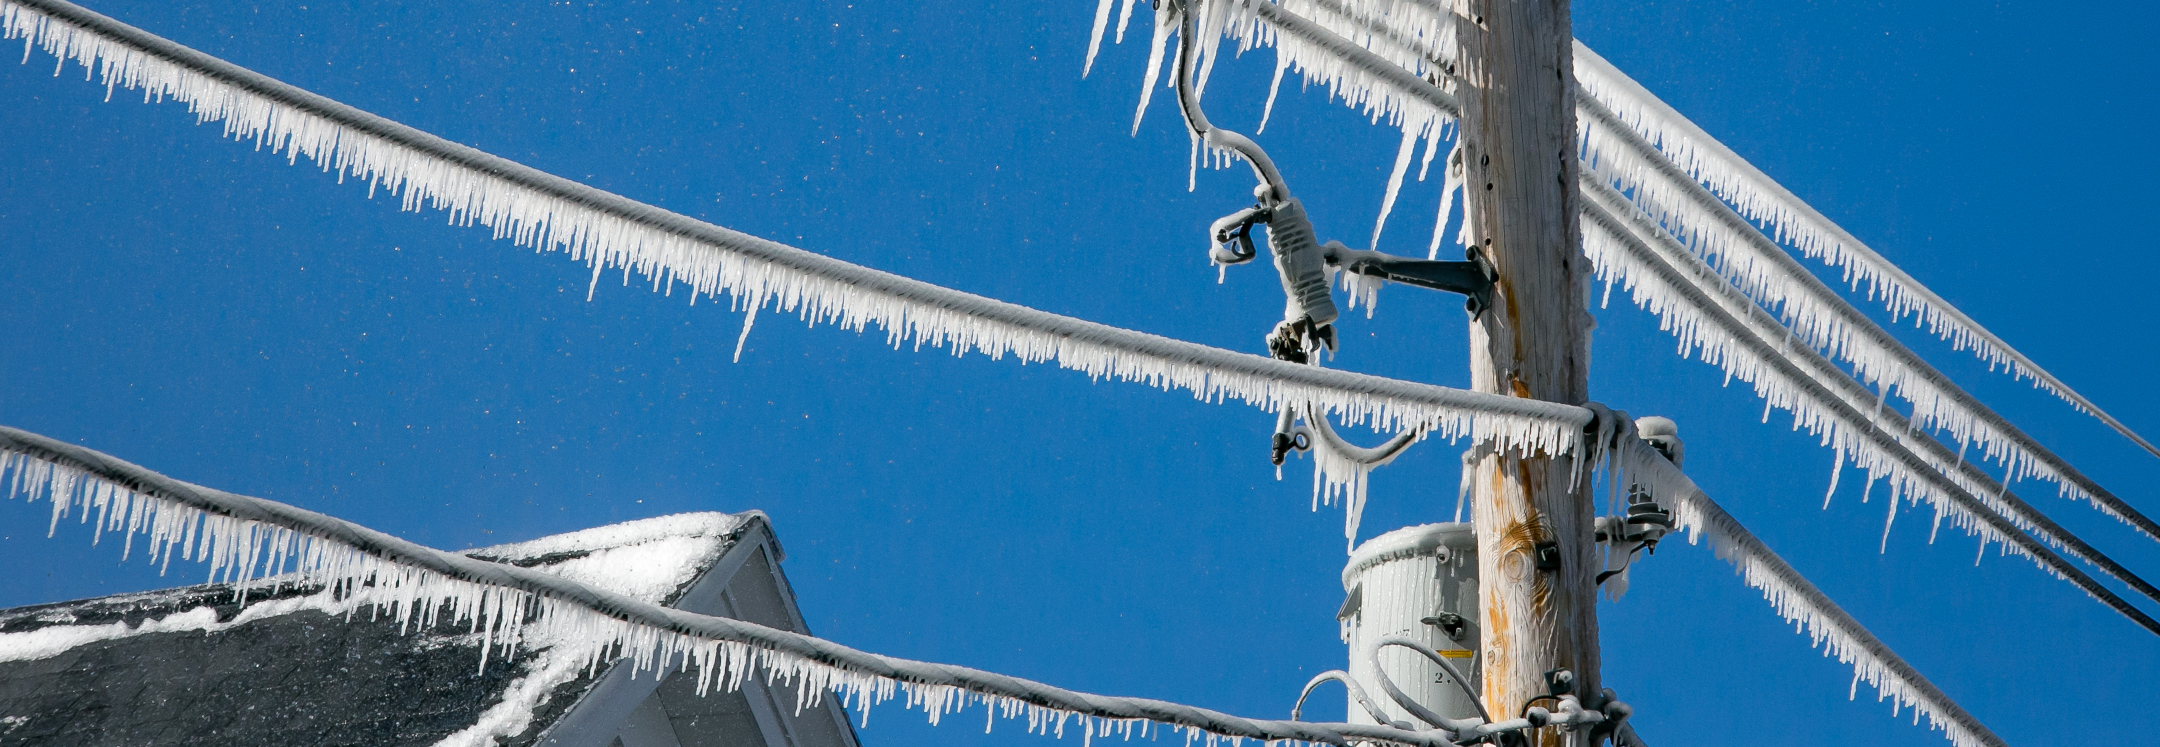 frozen powerlines after a snowstorm